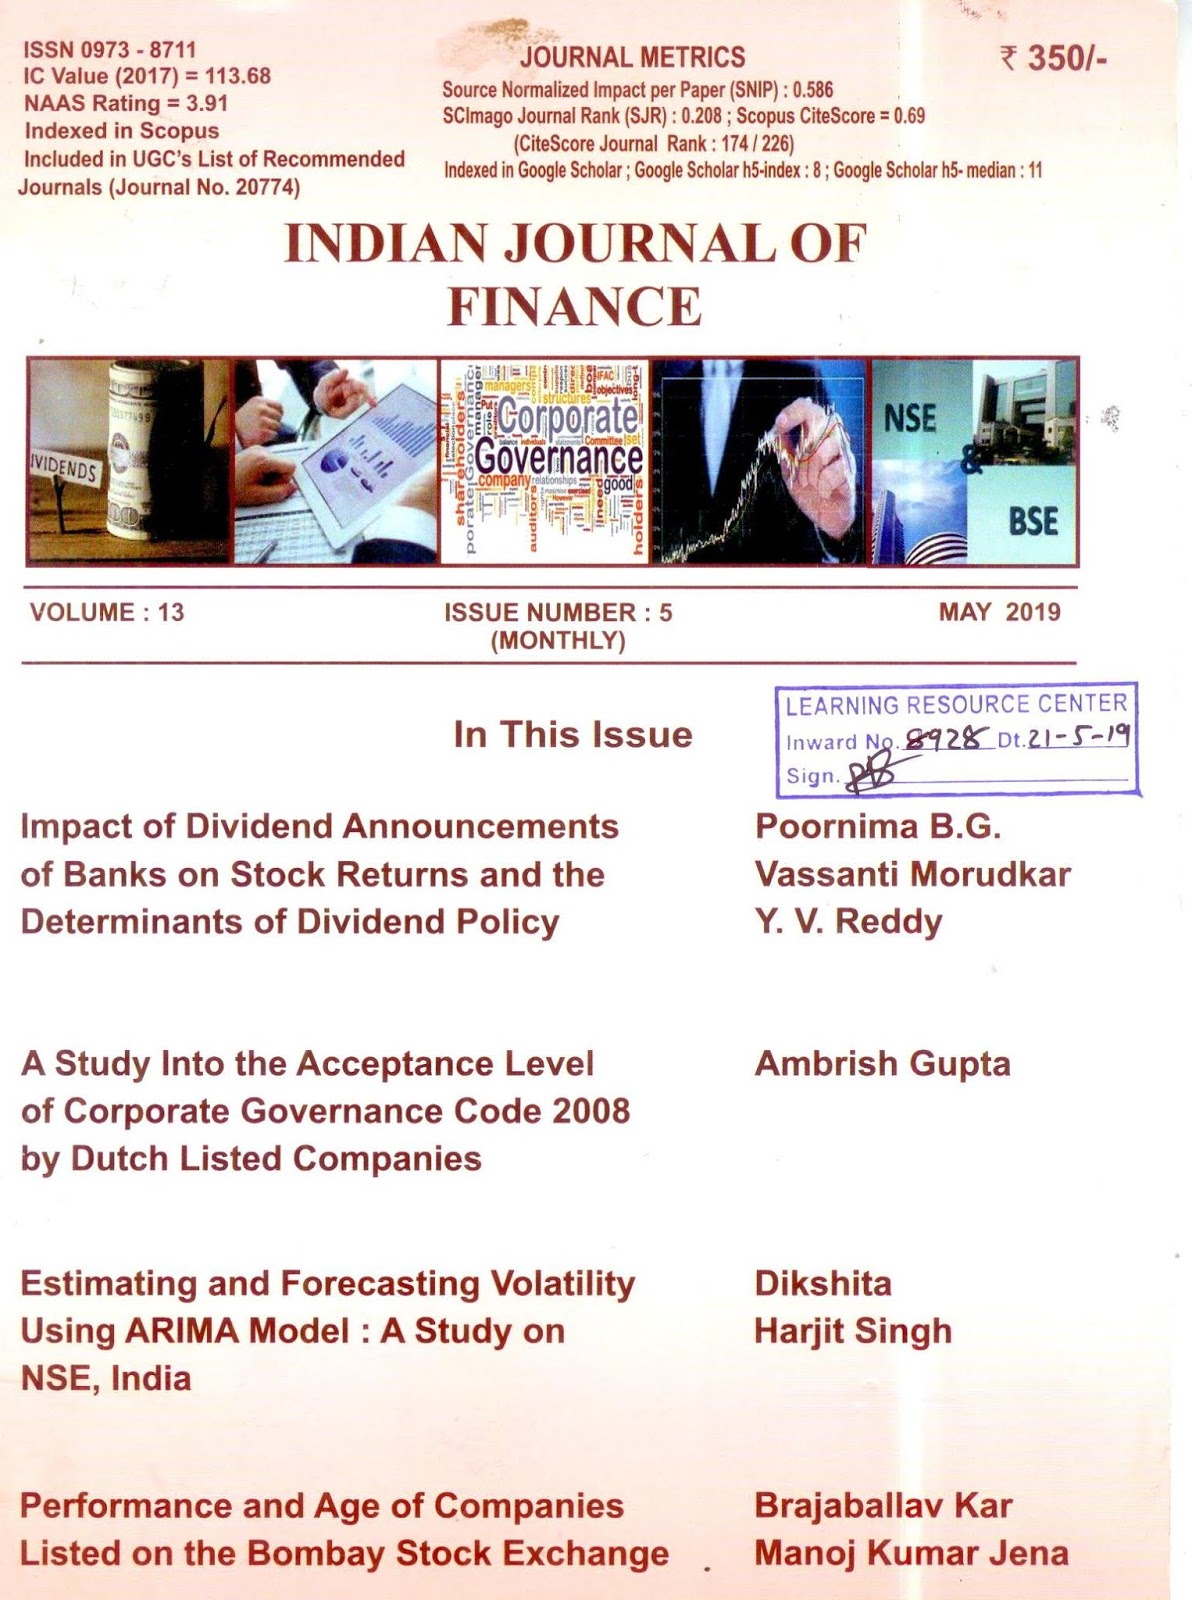 http://www.indianjournaloffinance.co.in/index.php/IJF/issue/view/8490